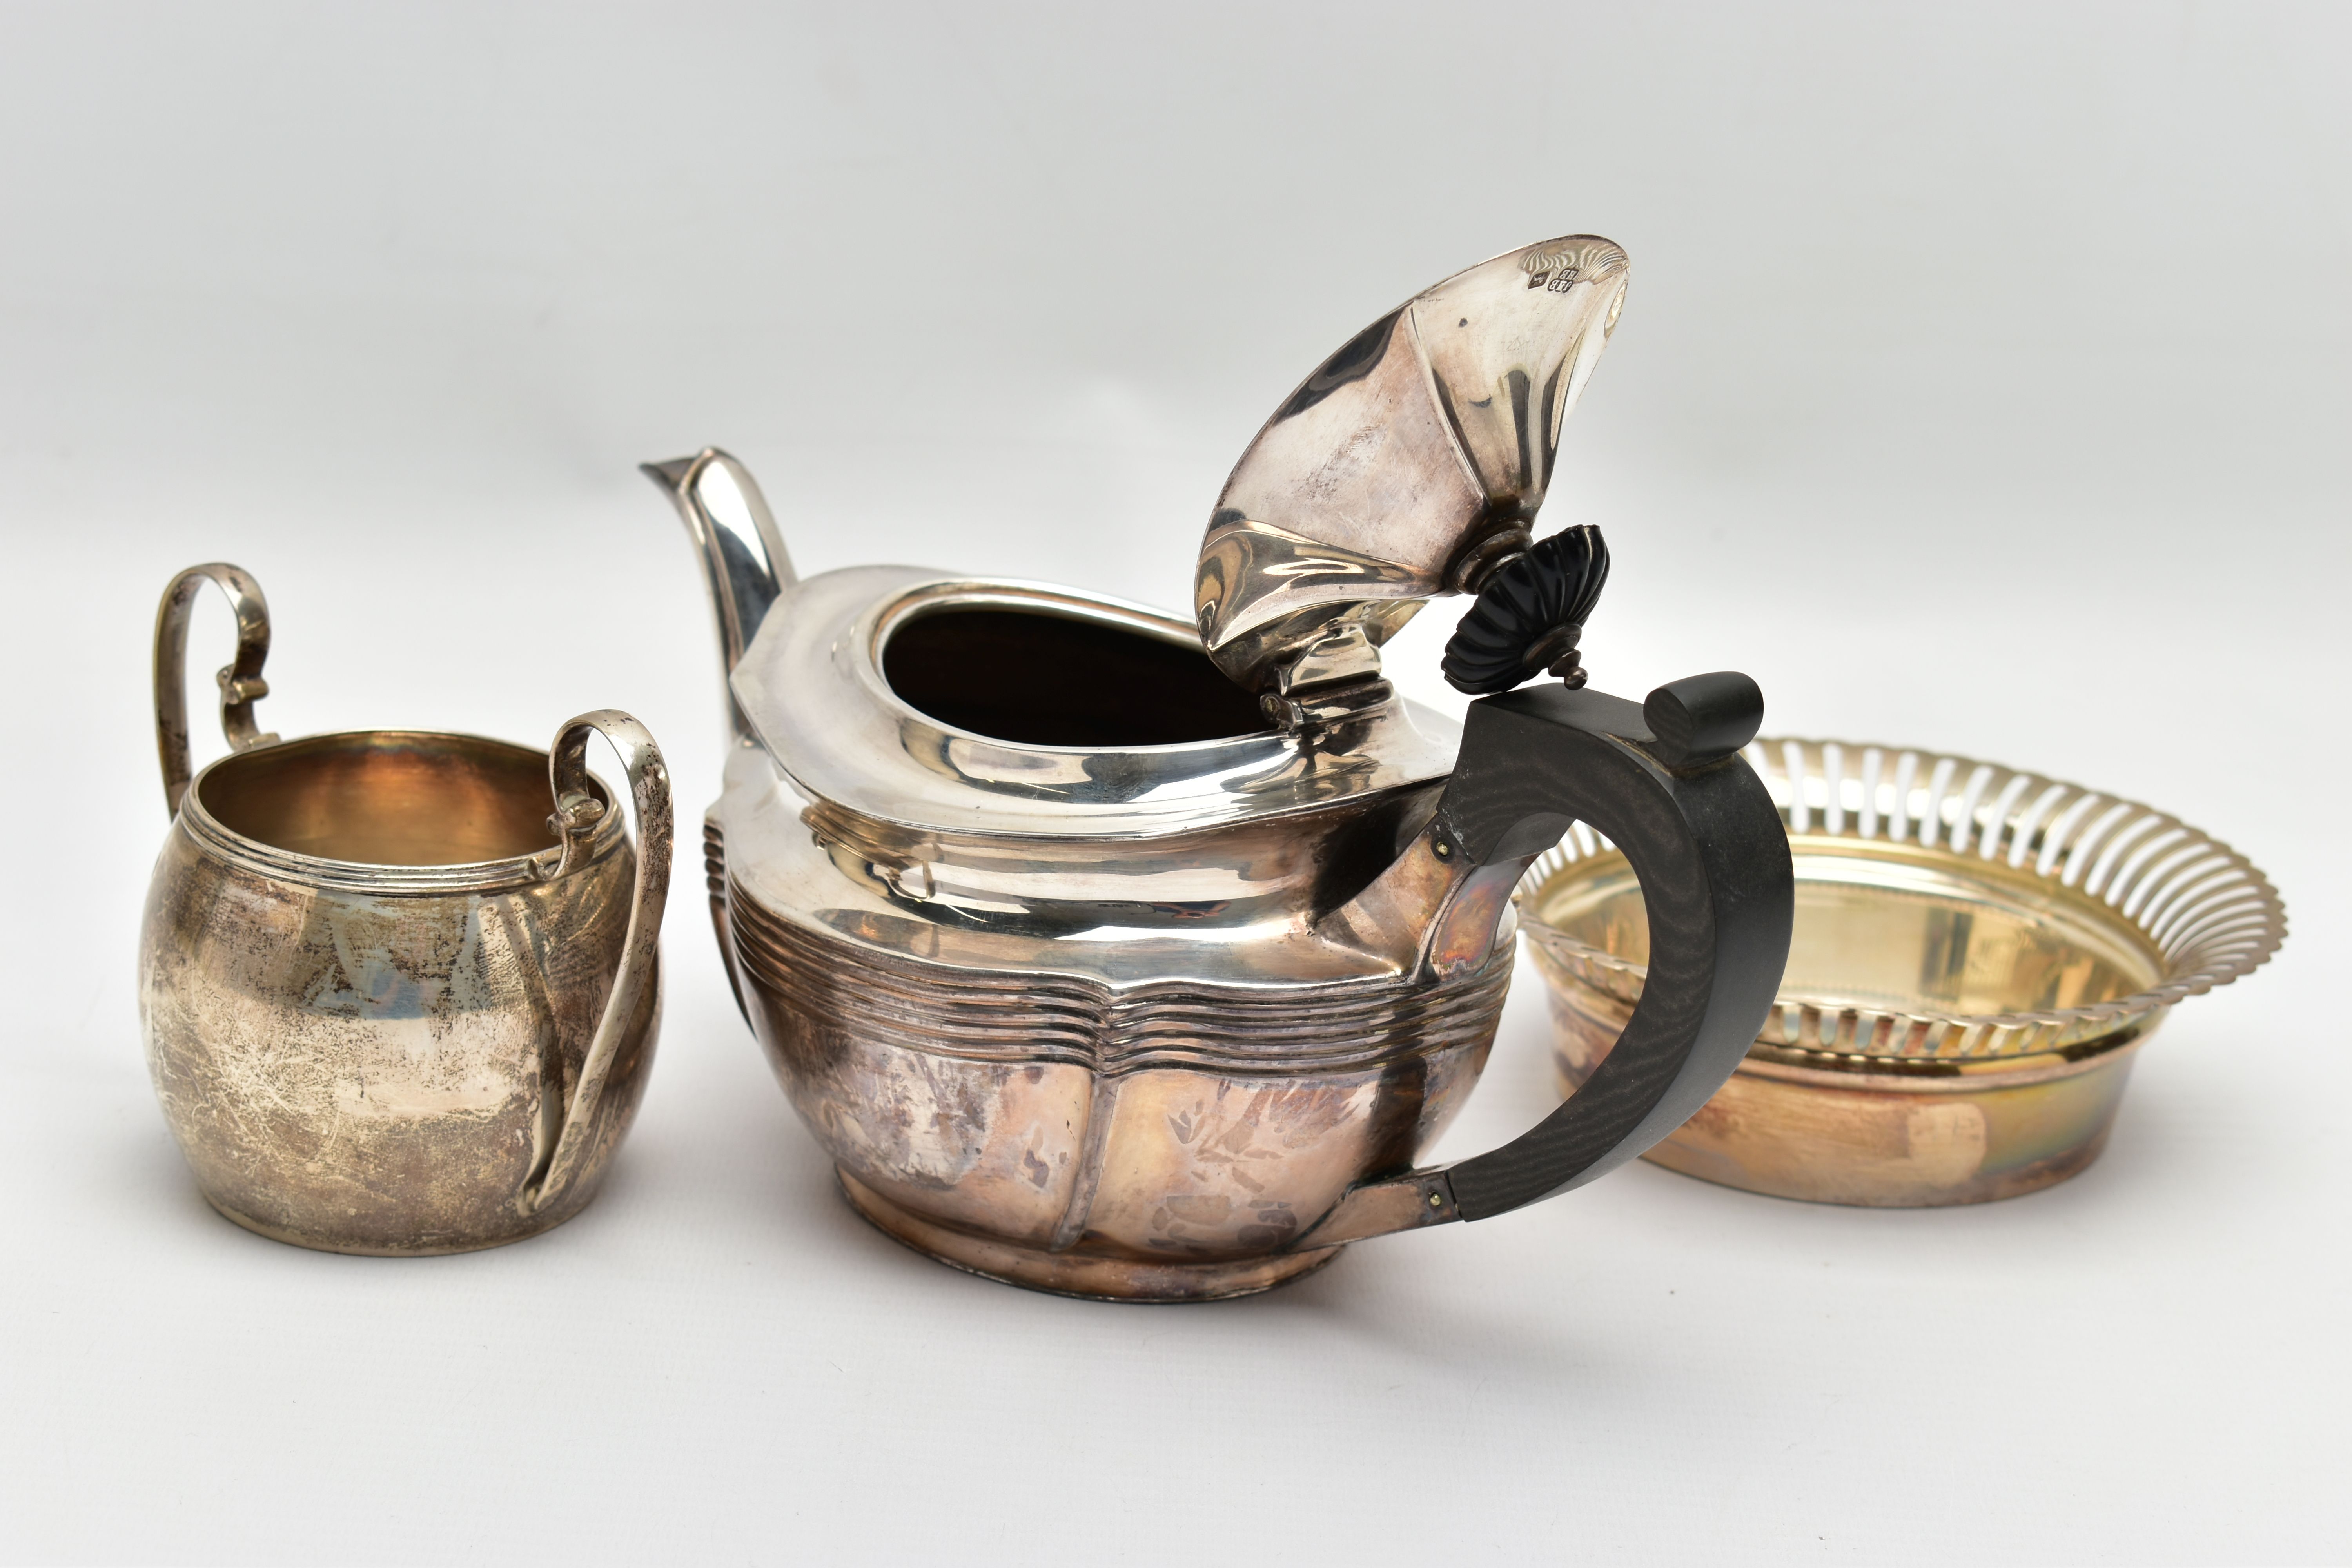 AN EDWARDIAN SILVER BACHELOR'S TEA POT OF SHAPED OVAL FORM, A TWIN HANDLED SILVER SUGAR BOWL AND A - Image 5 of 9